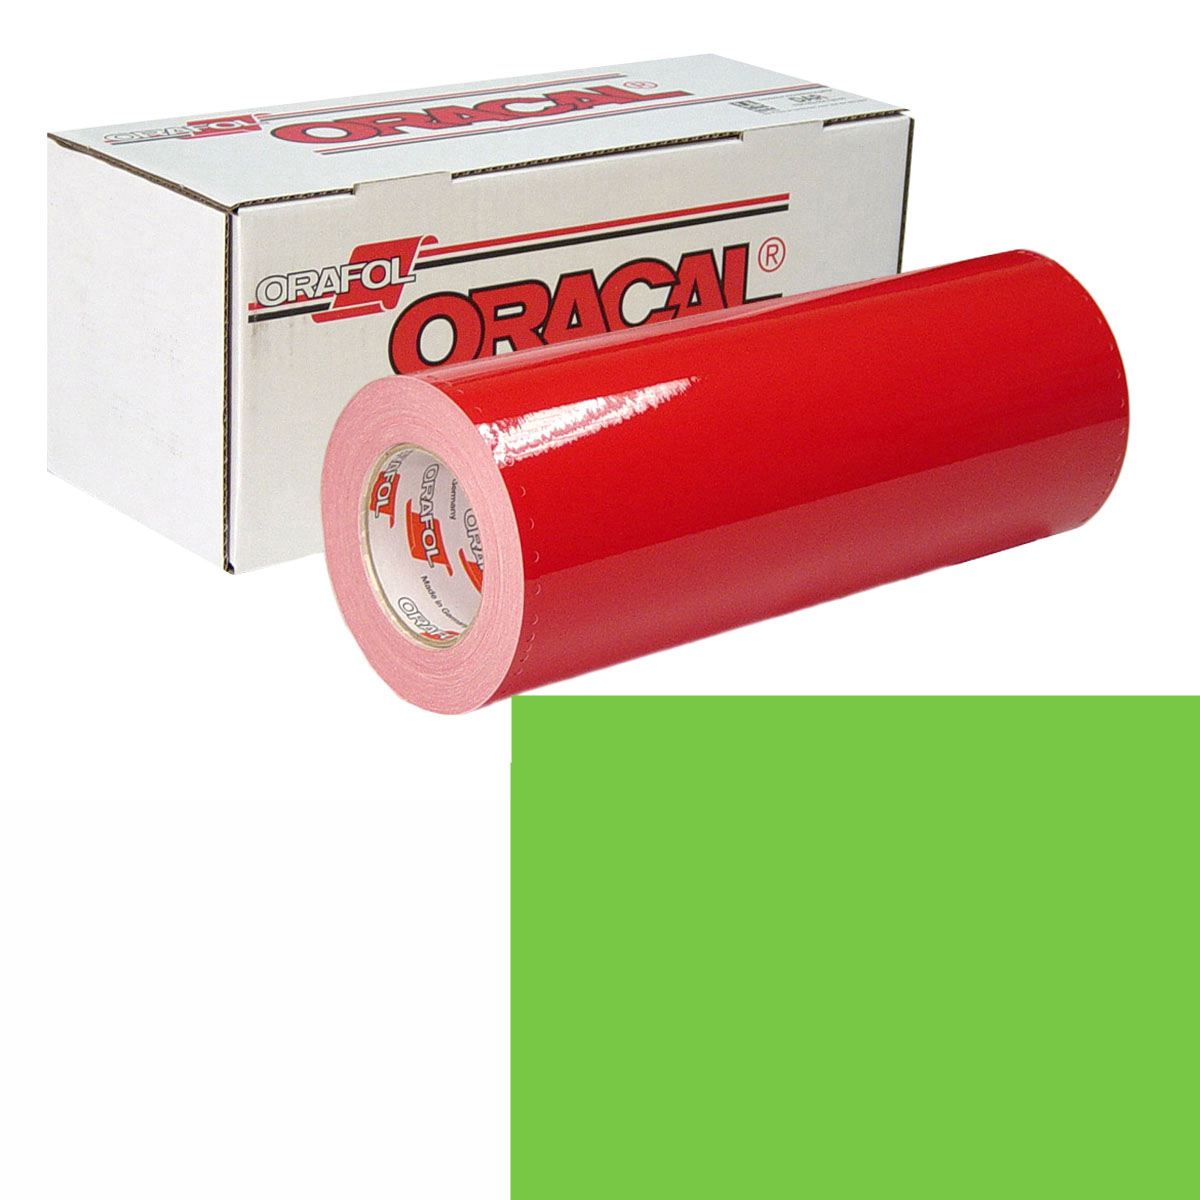 ORACAL 951 30in X 10yd 601 Lime Green